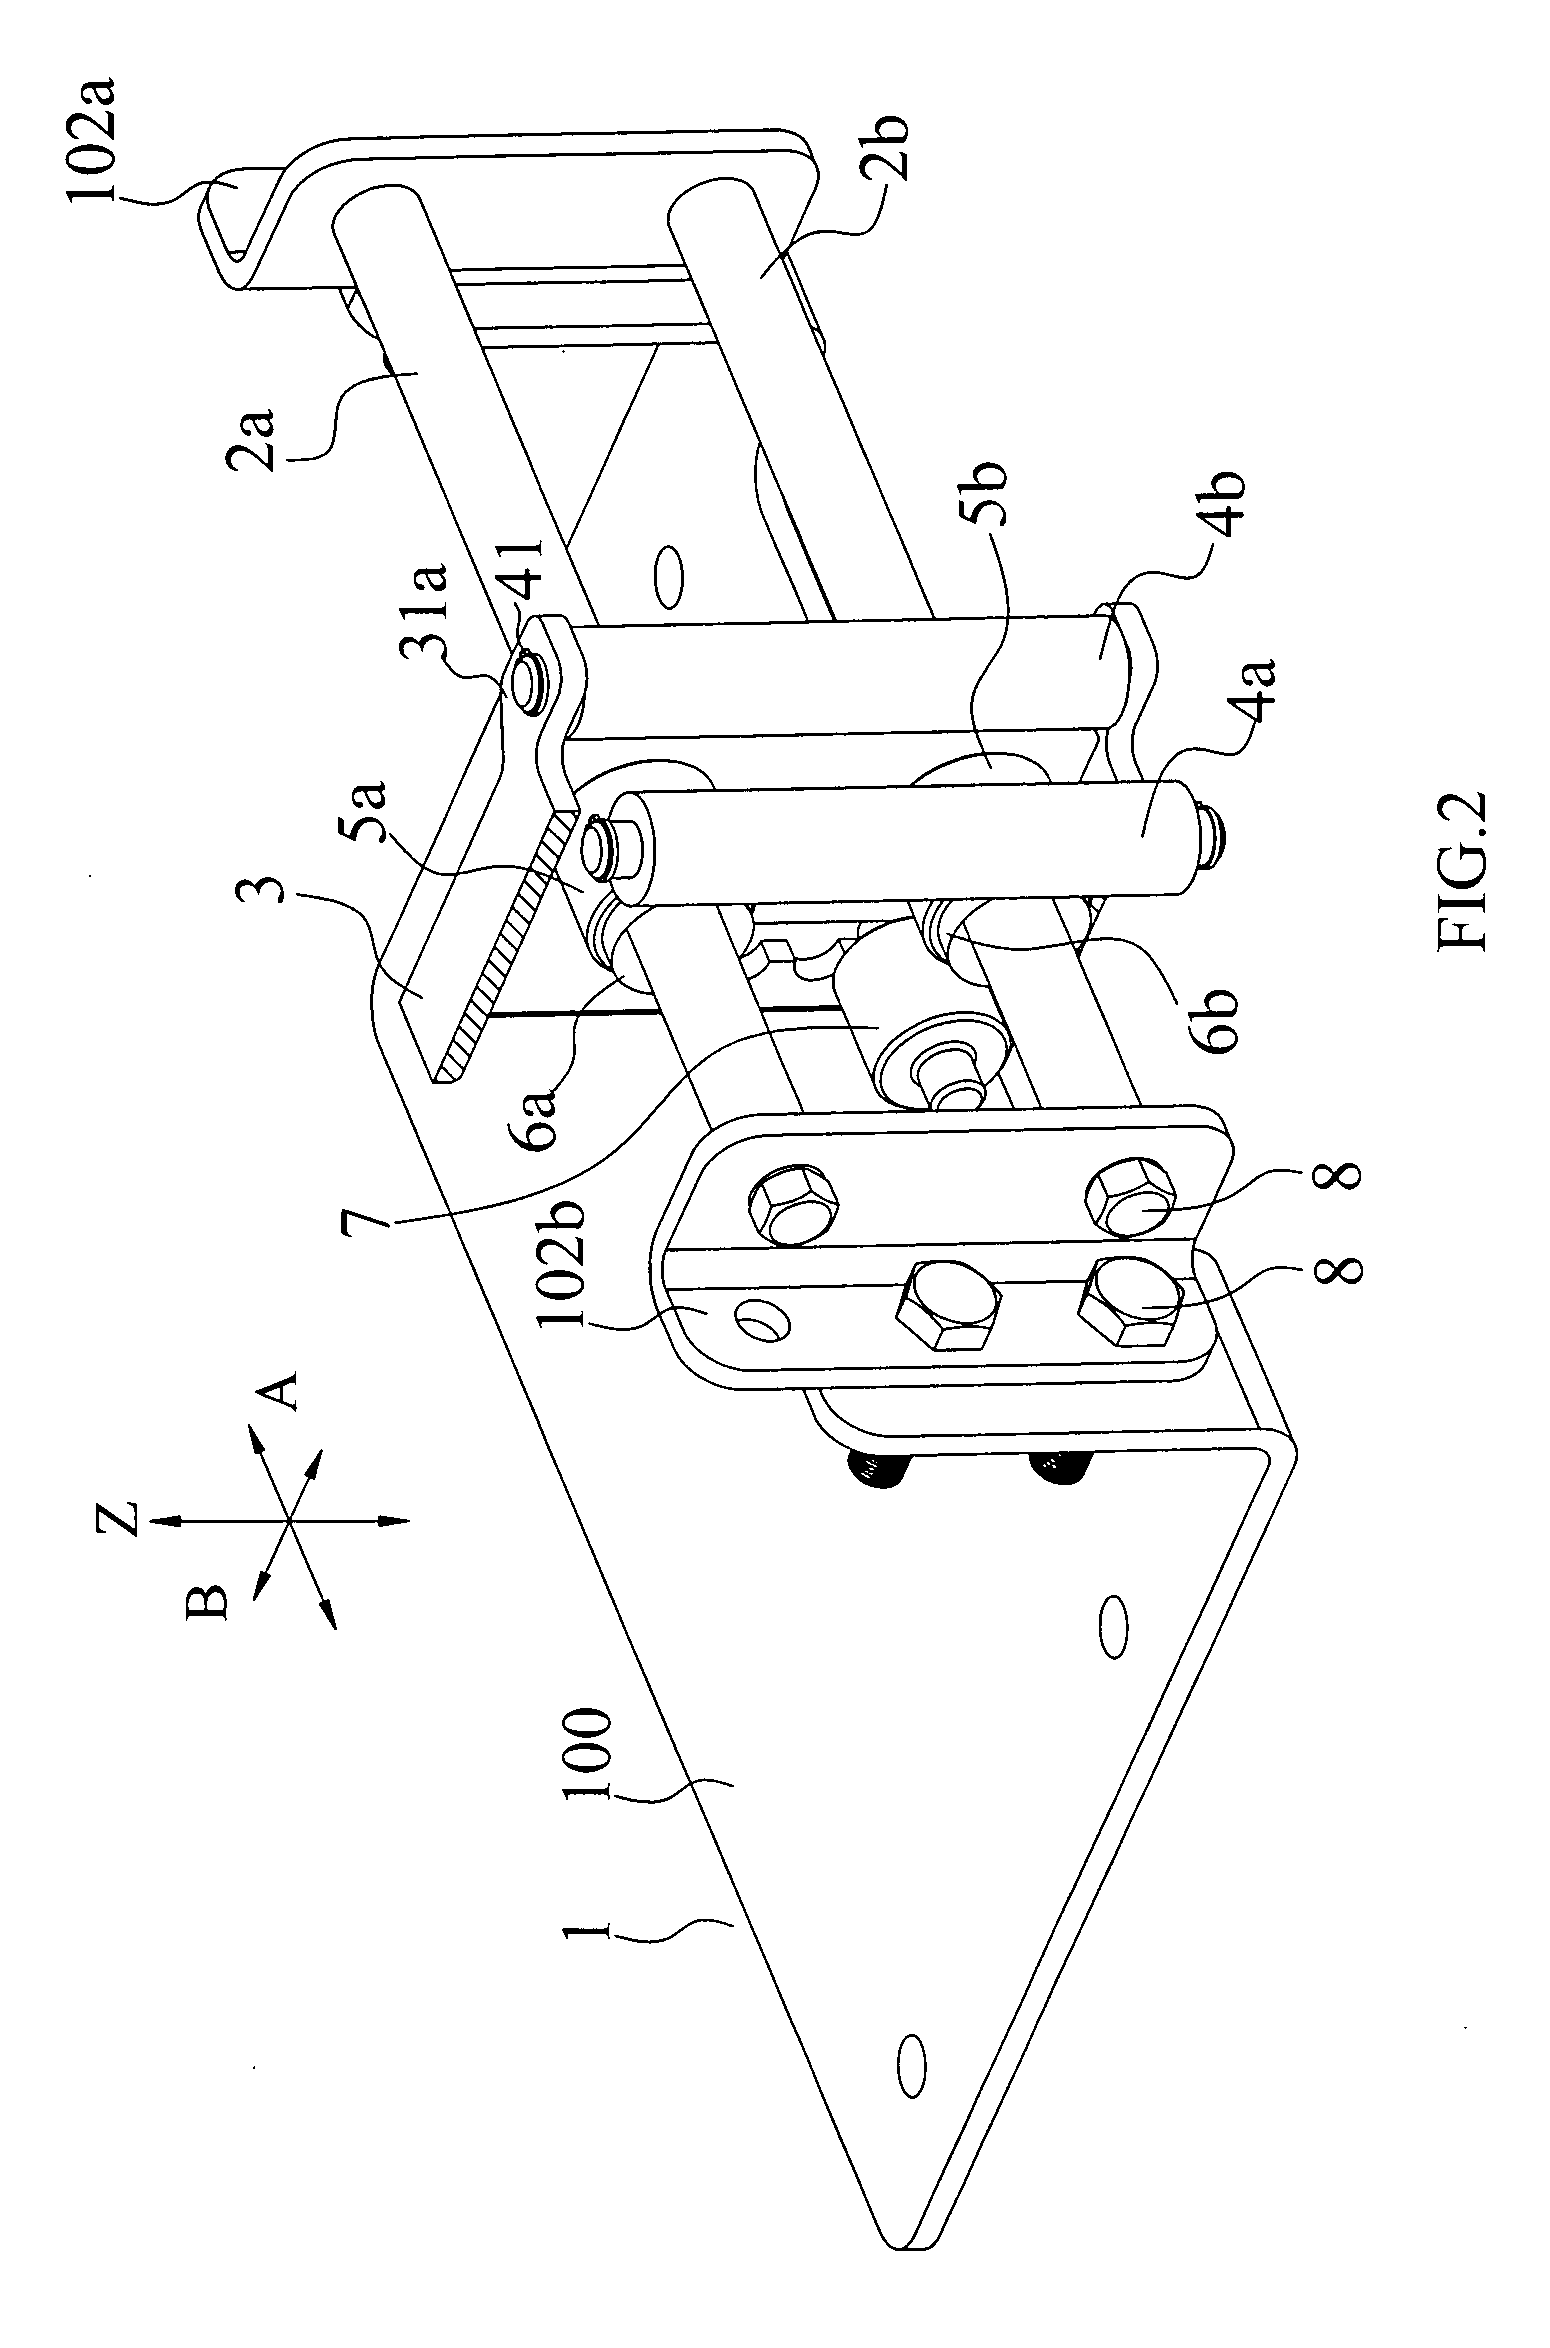 Cable guiding device